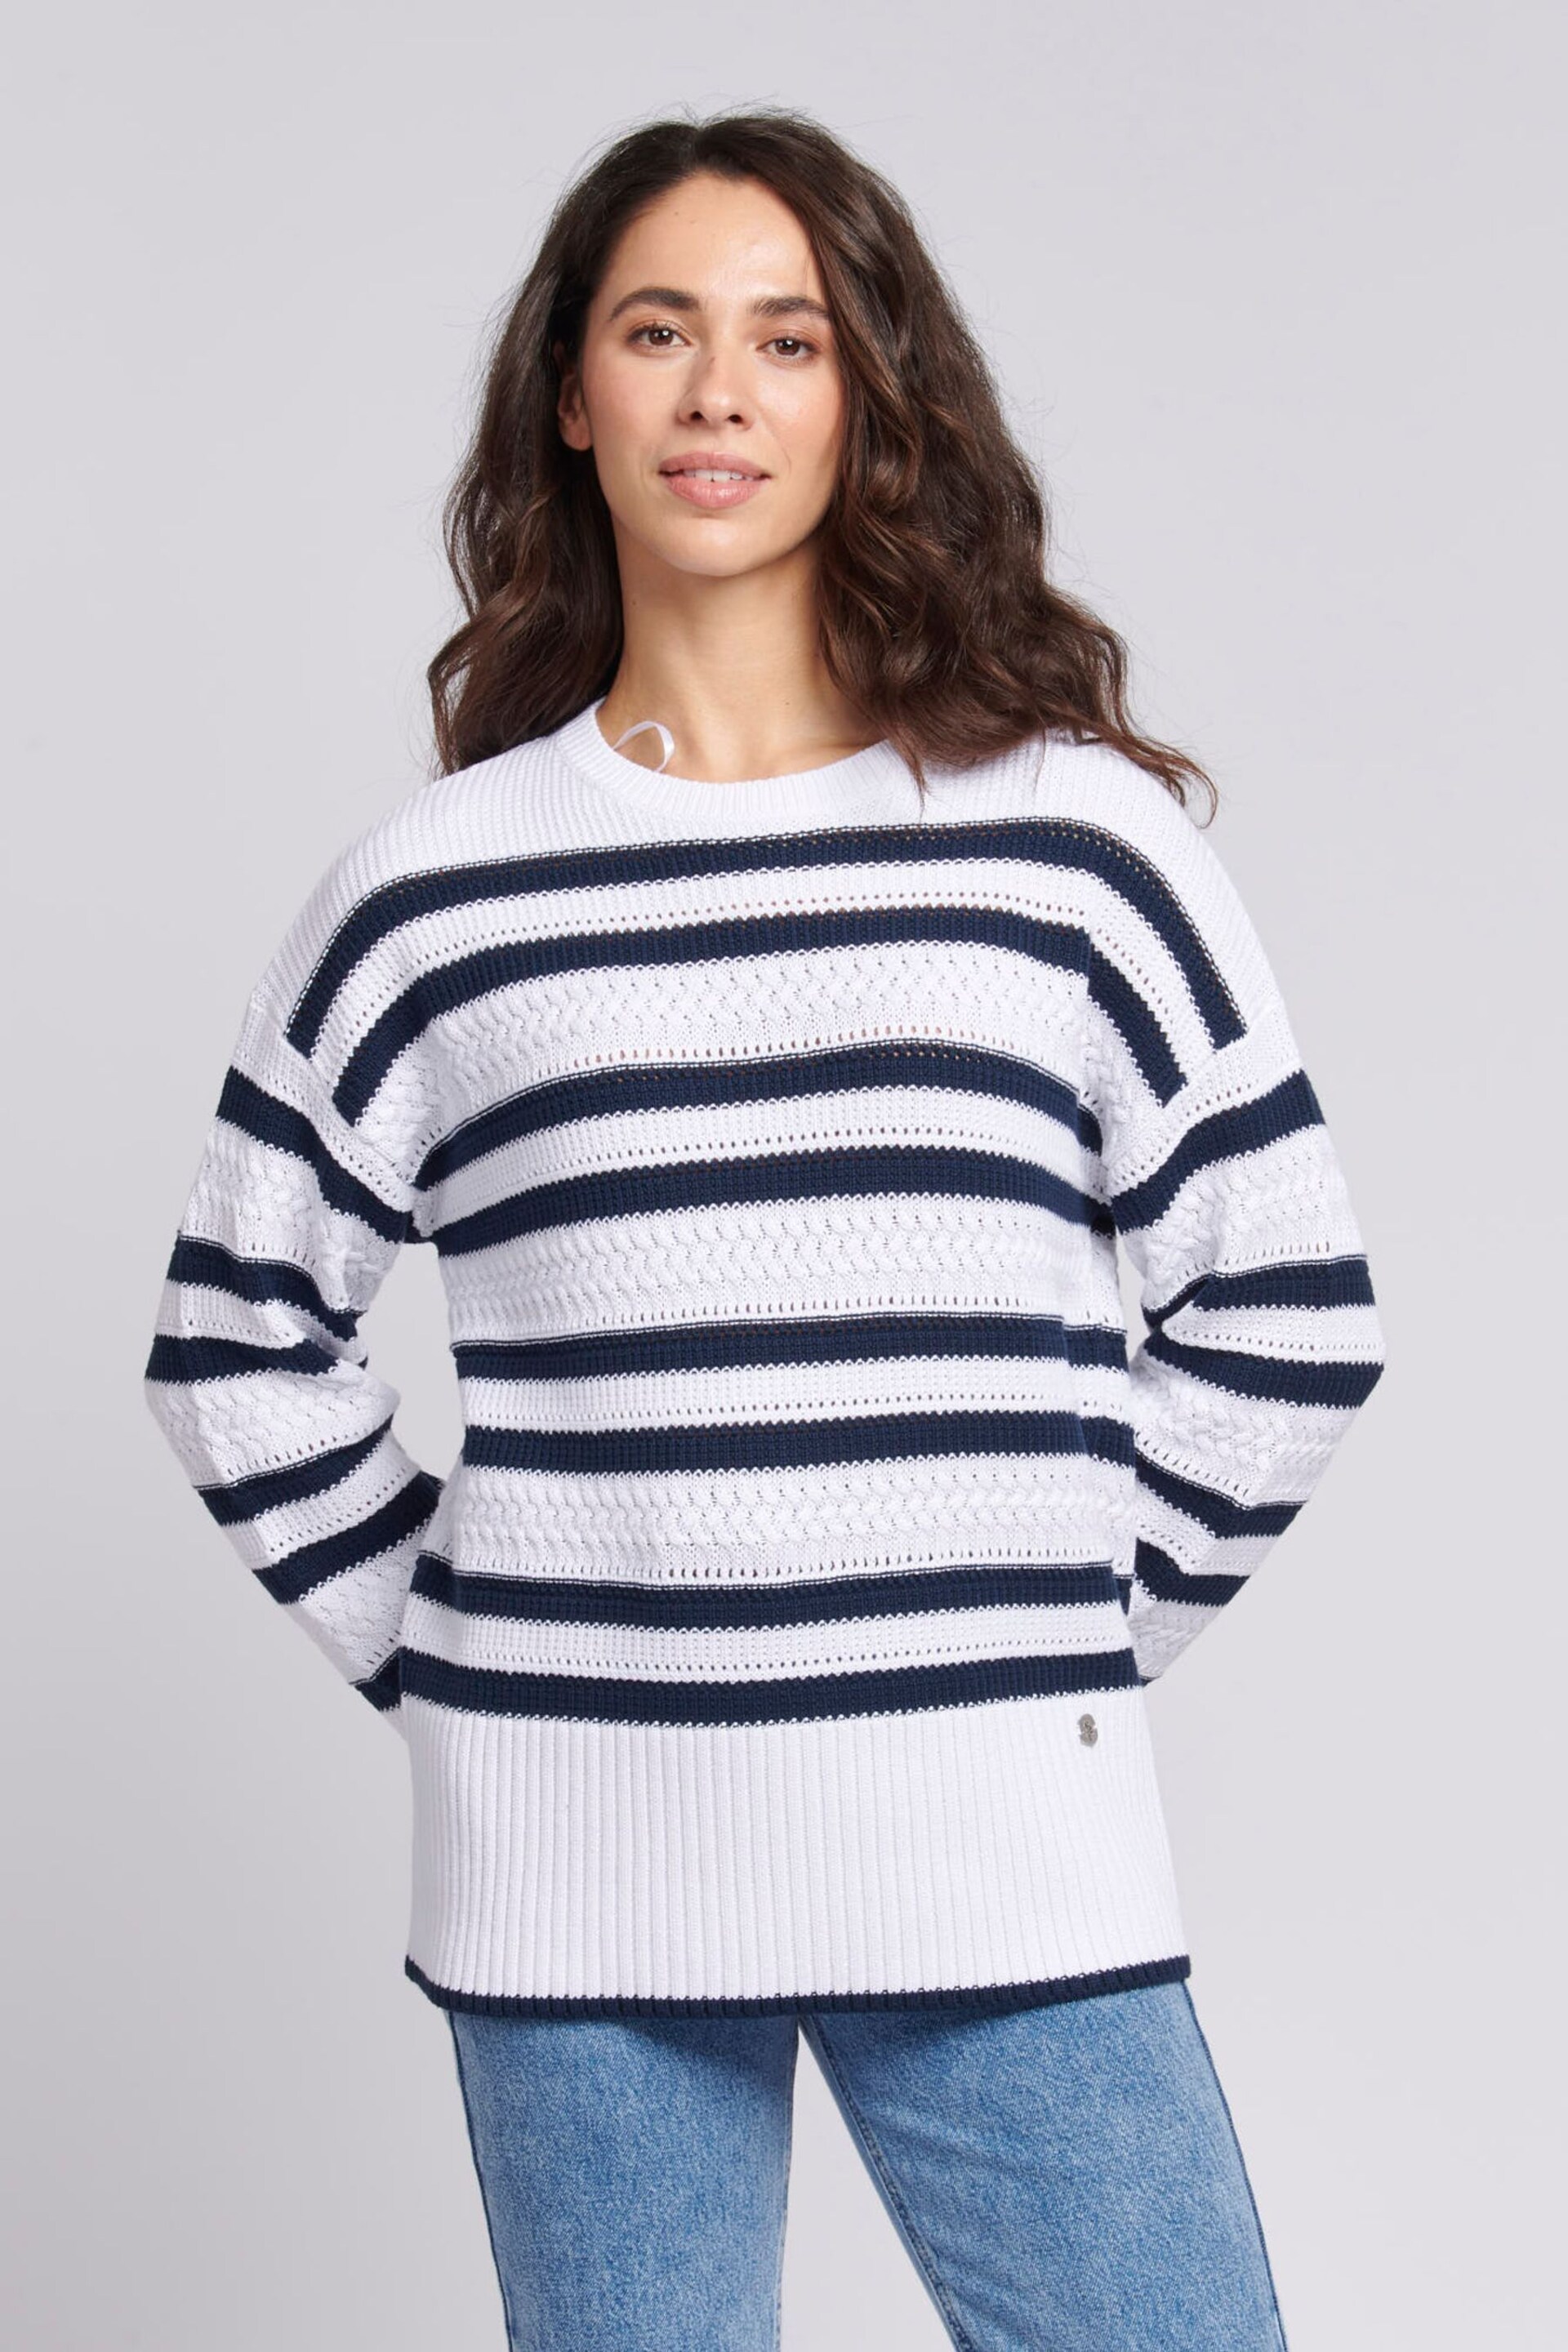 U.S. Polo Assn. Oversized Womens Blue Pointelle Knit Jumper - Image 1 of 8